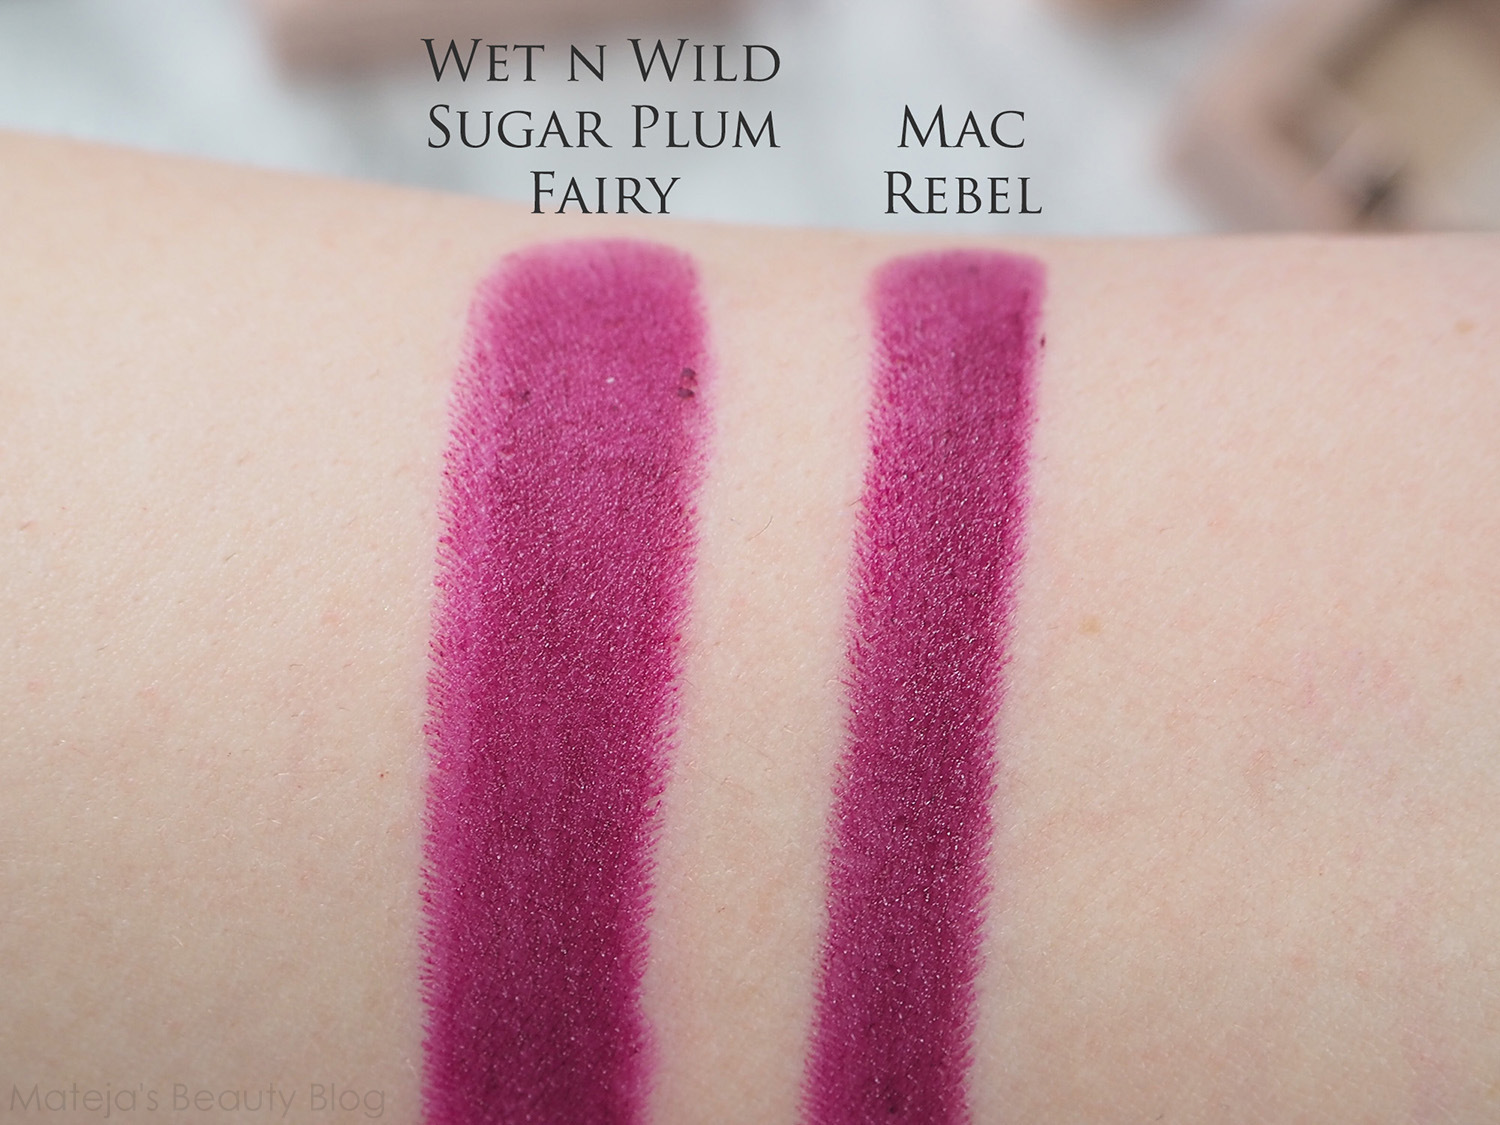 20 Mac lipsticks swatched plus their dupes.